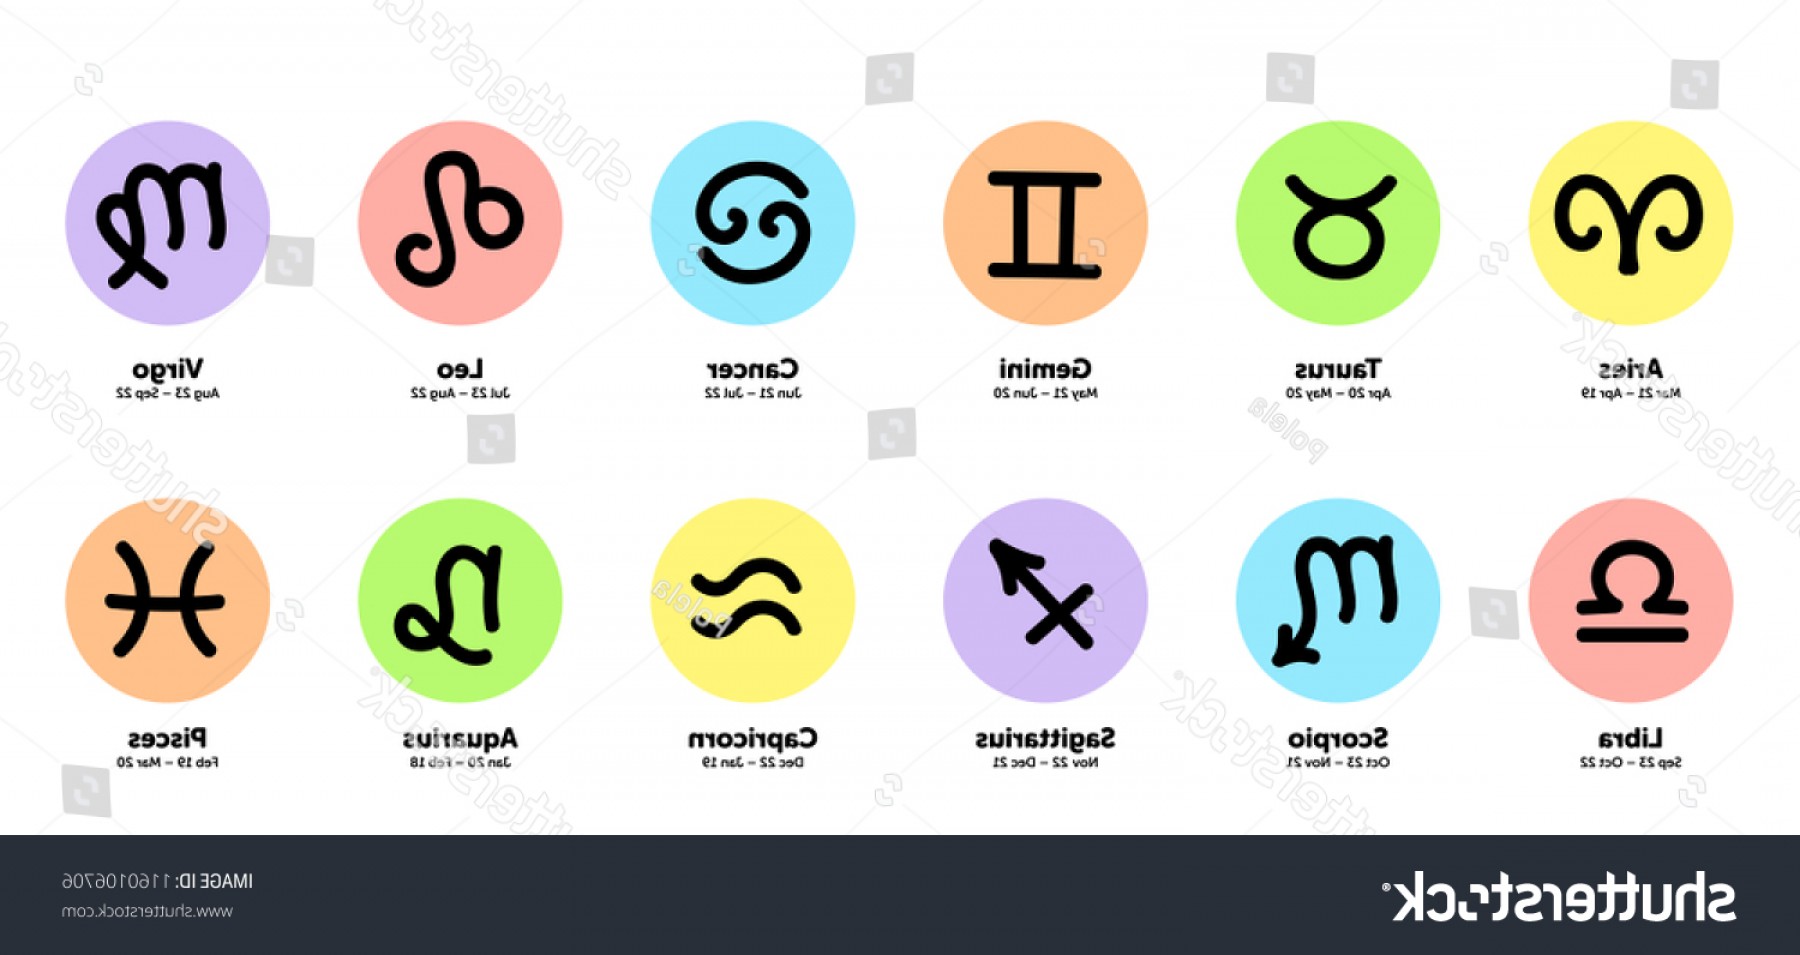 Zodiac Signs Vector at Vectorified.com | Collection of Zodiac Signs ...